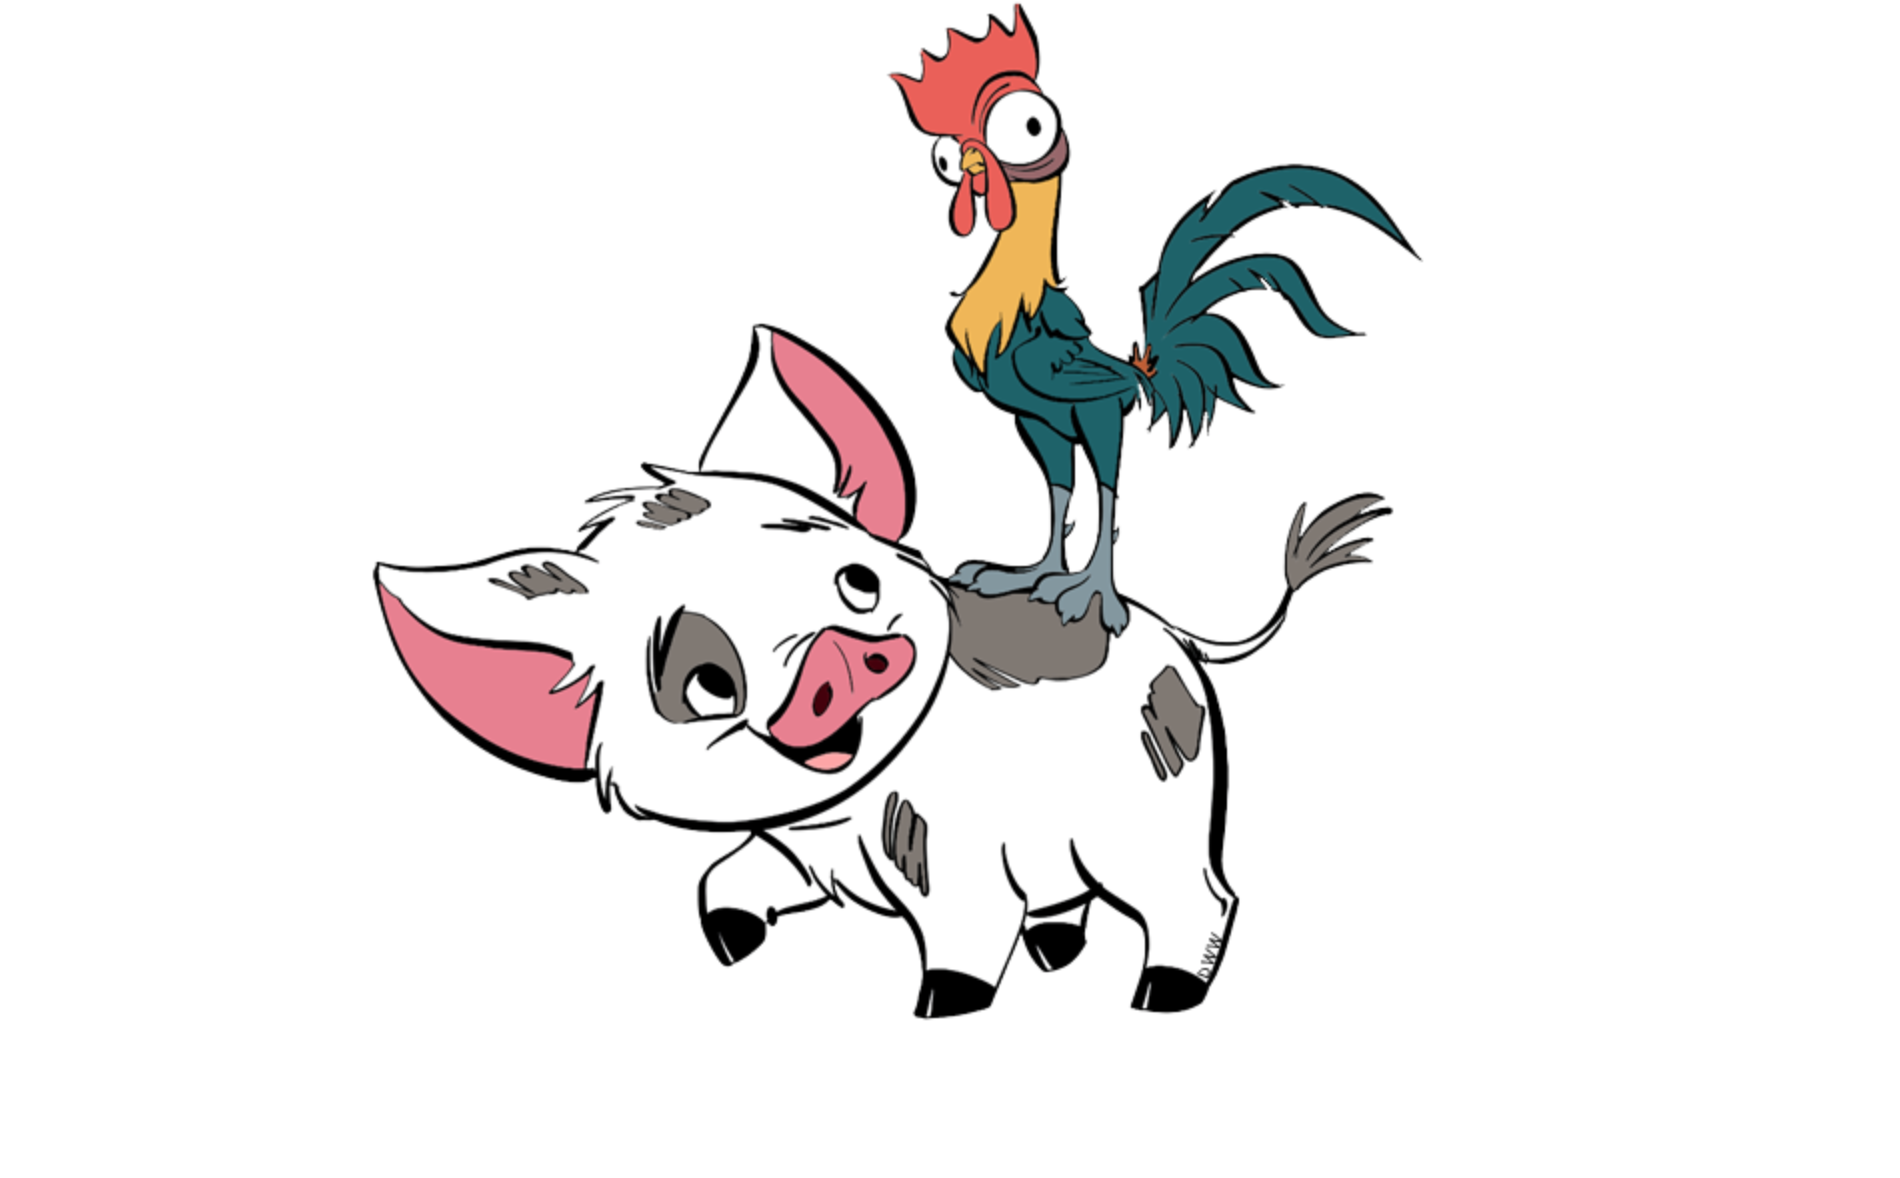 download-pua-and-heihei-moana-s-pet-pig-rooster-disney-drawings-by